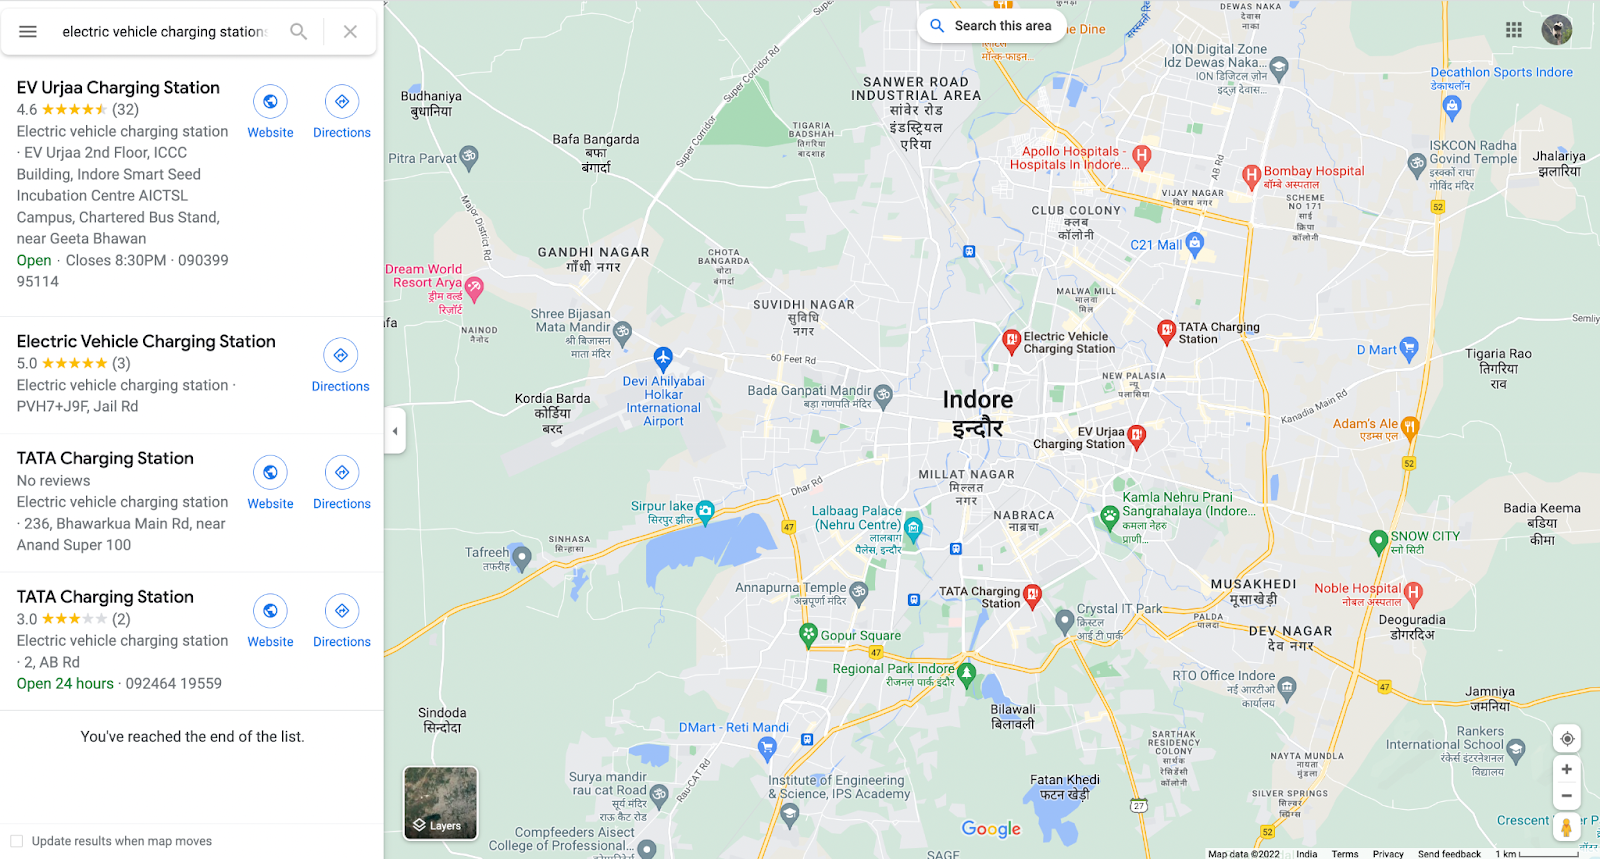 electric vehicle charging stations in Indore-google map- yocharge